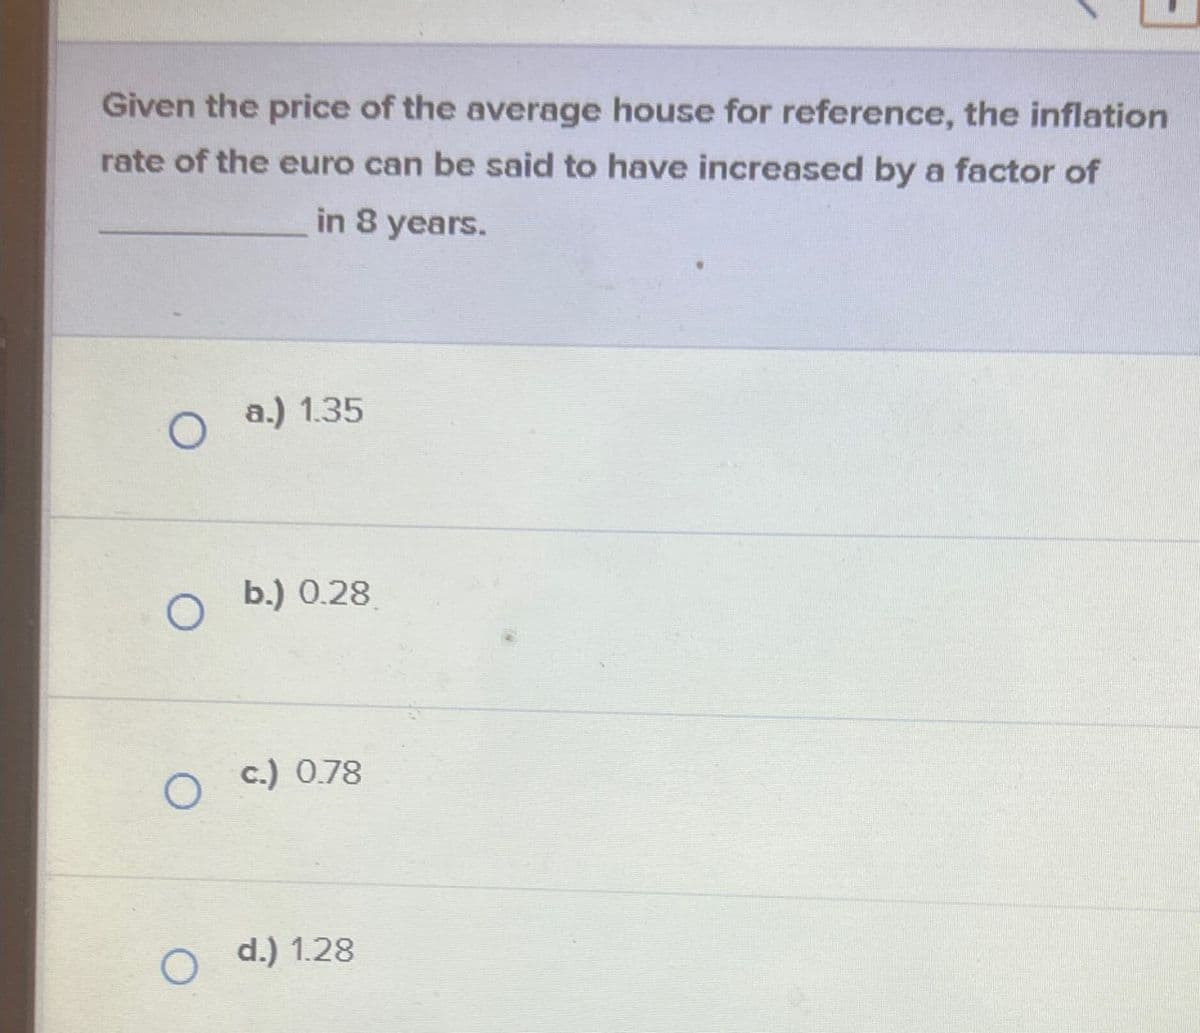 Given the price of the average house for reference, the inflation
rate of the euro can be said to have increased by a factor of
in 8 years.
O a.) 1.35
O
b.) 0.28
O
c.) 0.78
O
d.) 1.28